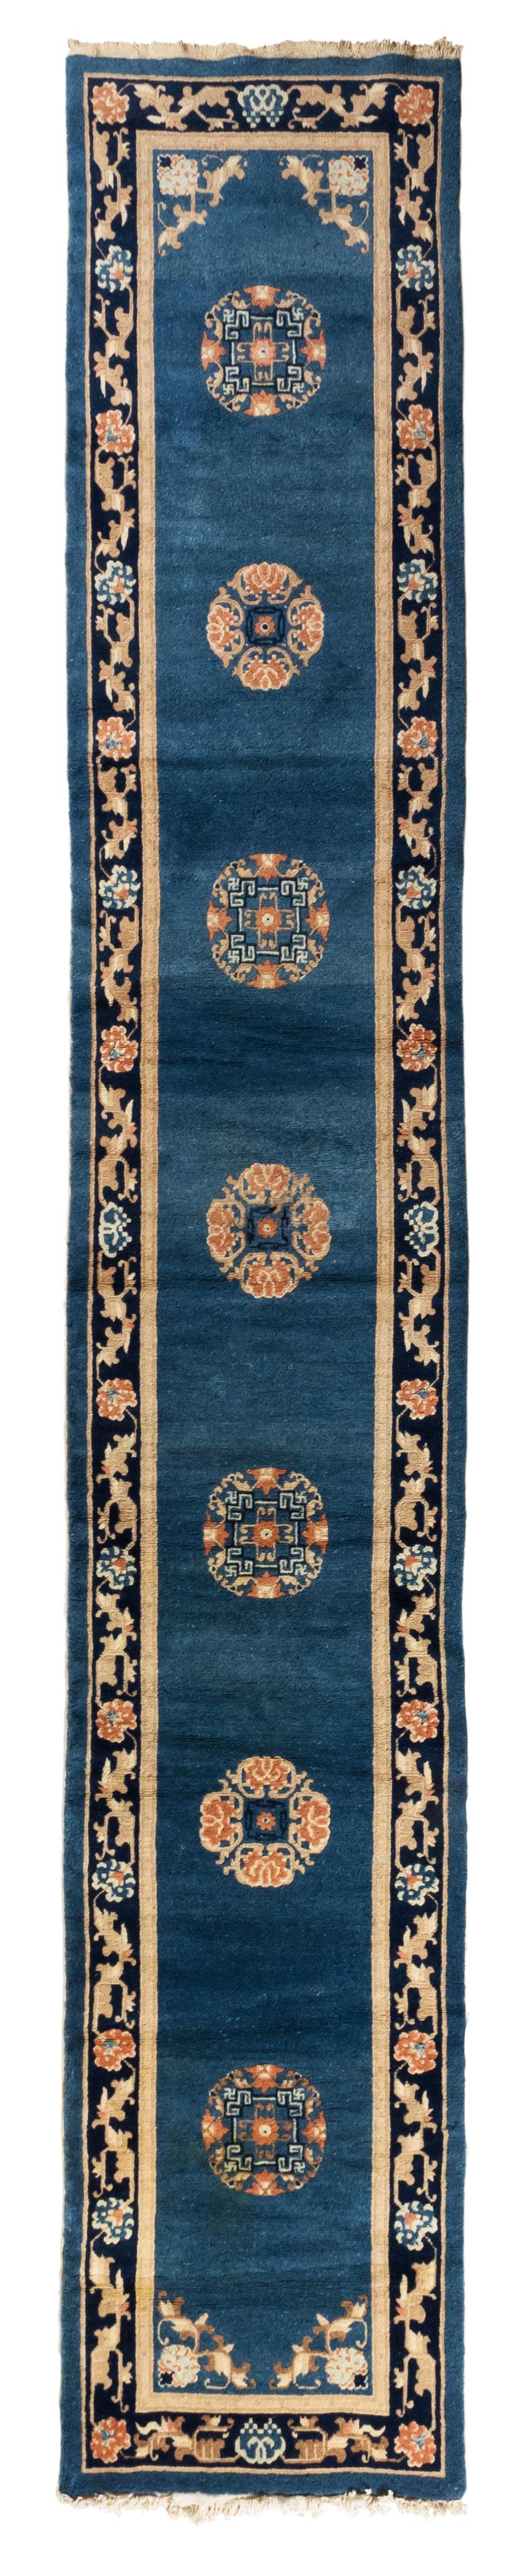 This is a lovely and pristine pair of antique blue gold black Art Deco Chinese runner rugs c. 1920-1930, each measuring 2.6 x 14.8 ft.